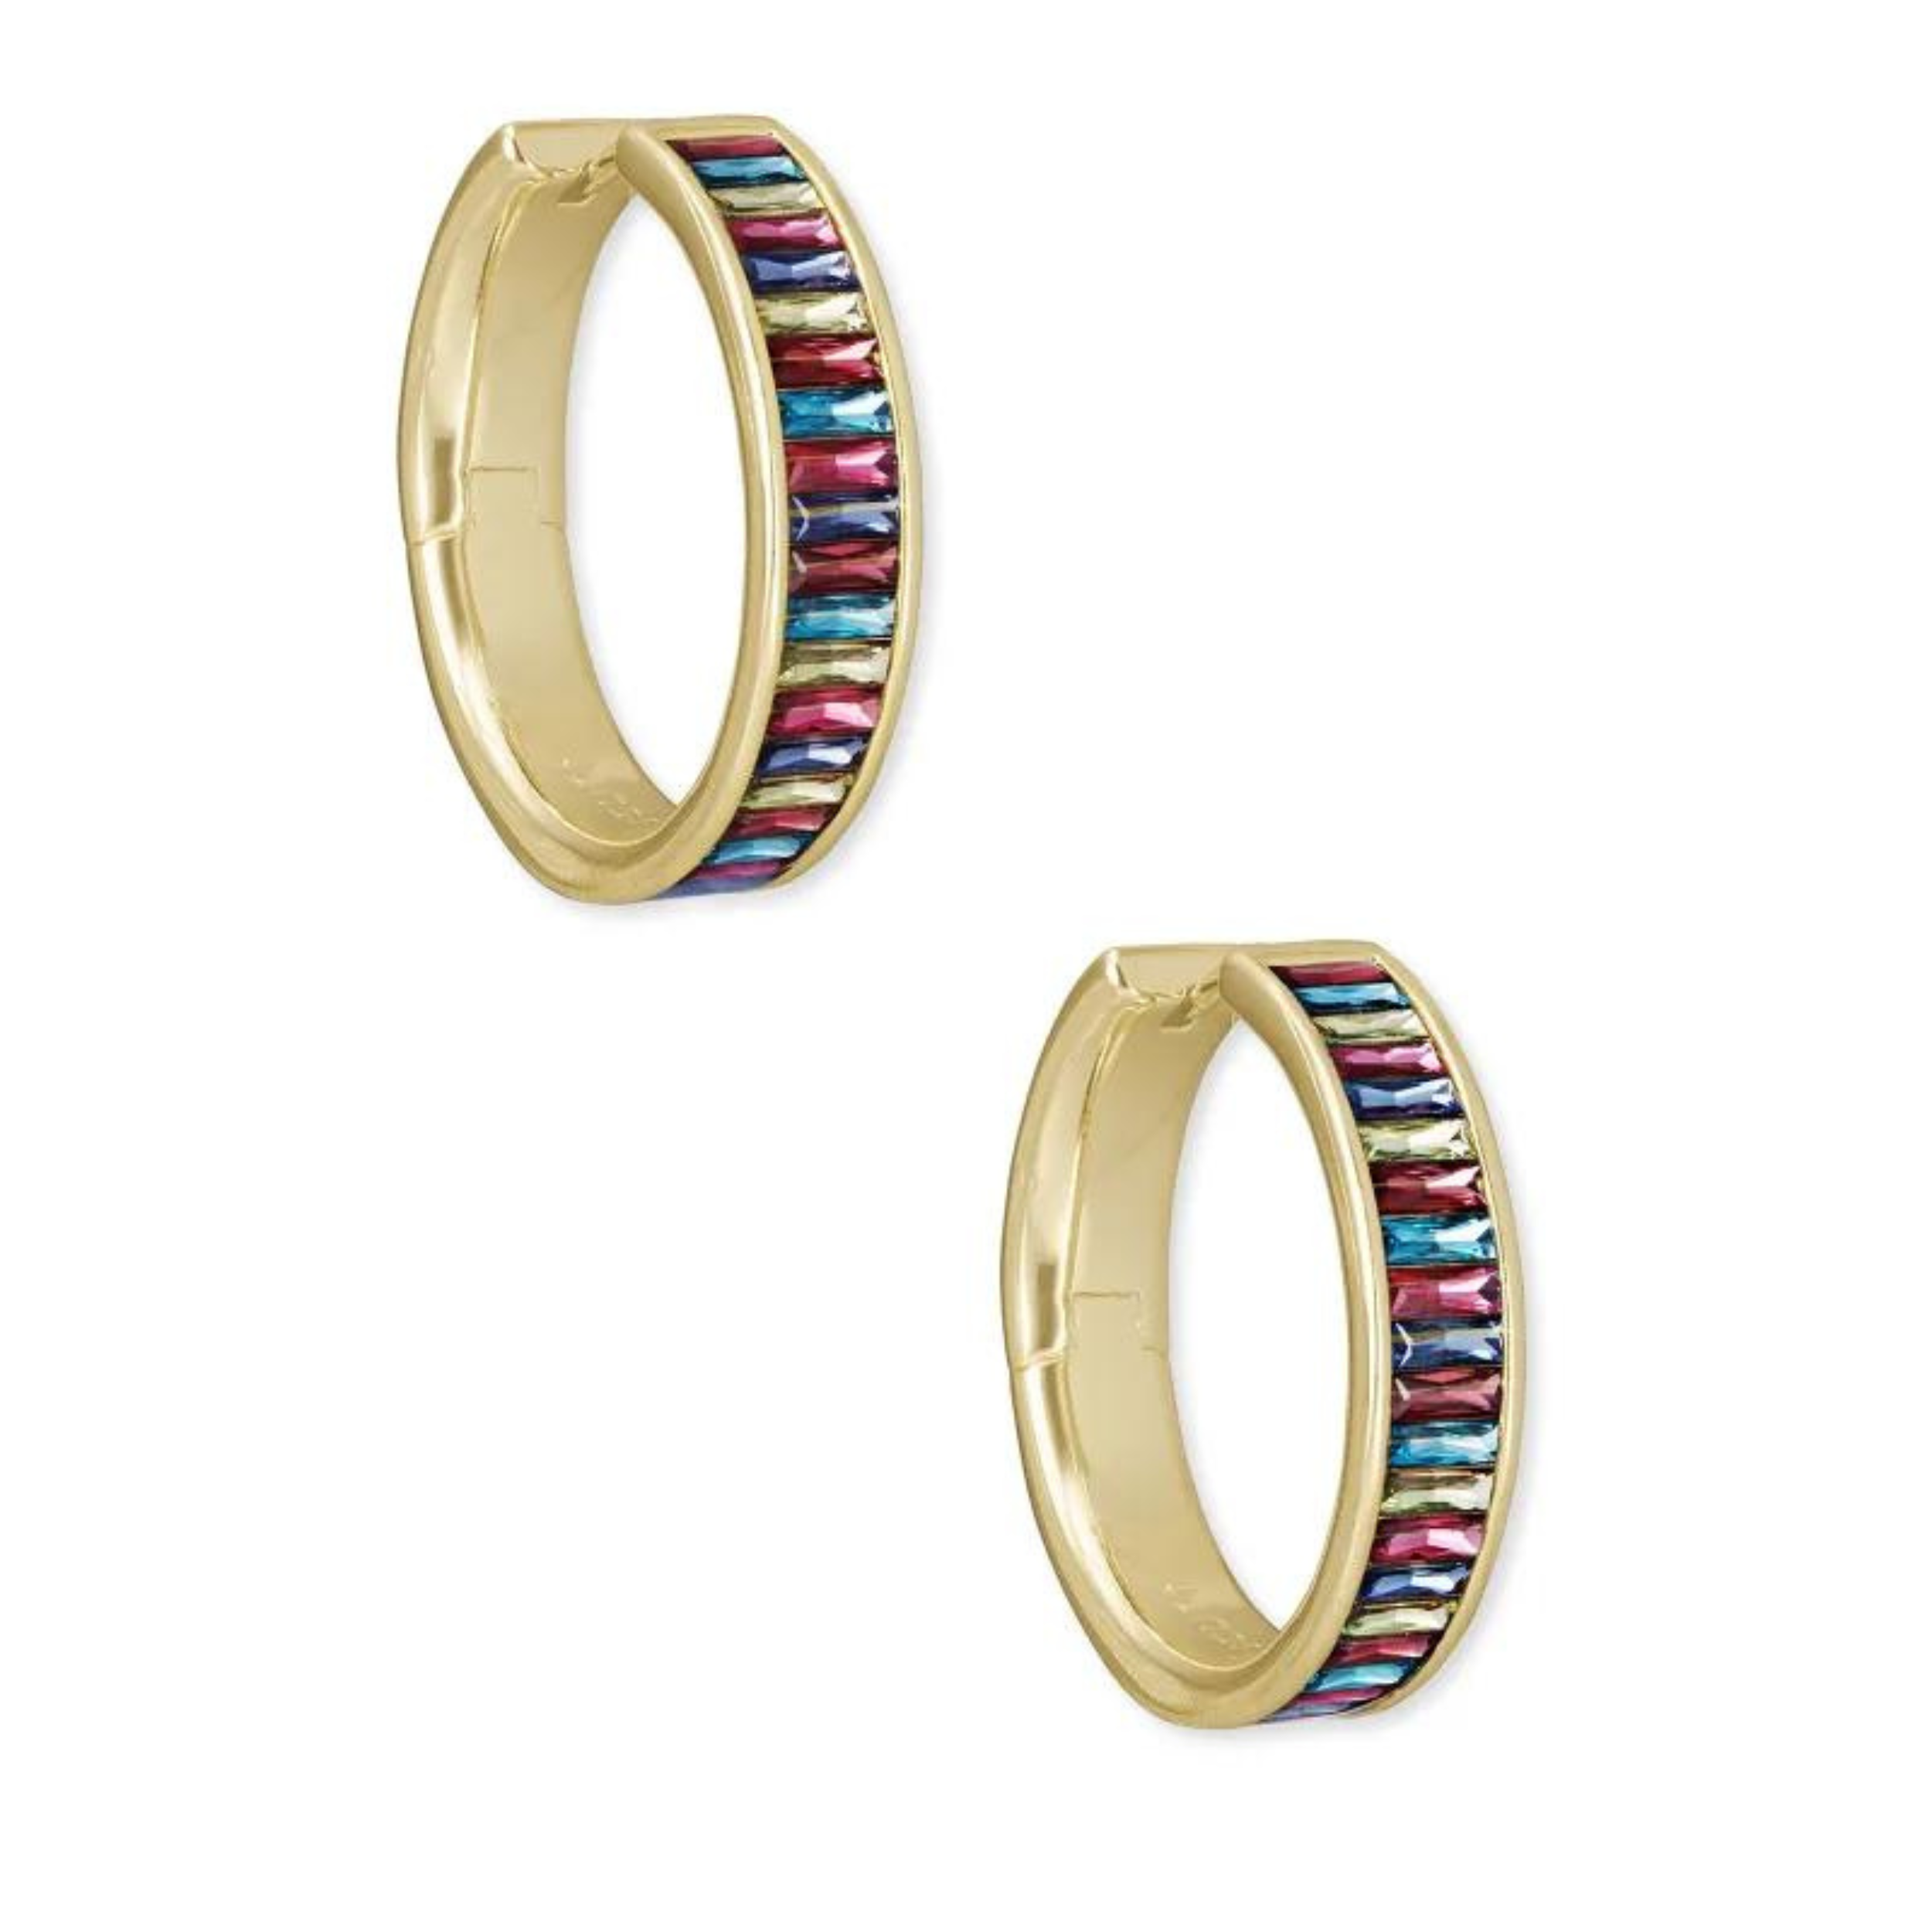 Gold hoop earrings with multi colored crystals, pictured on a white background.